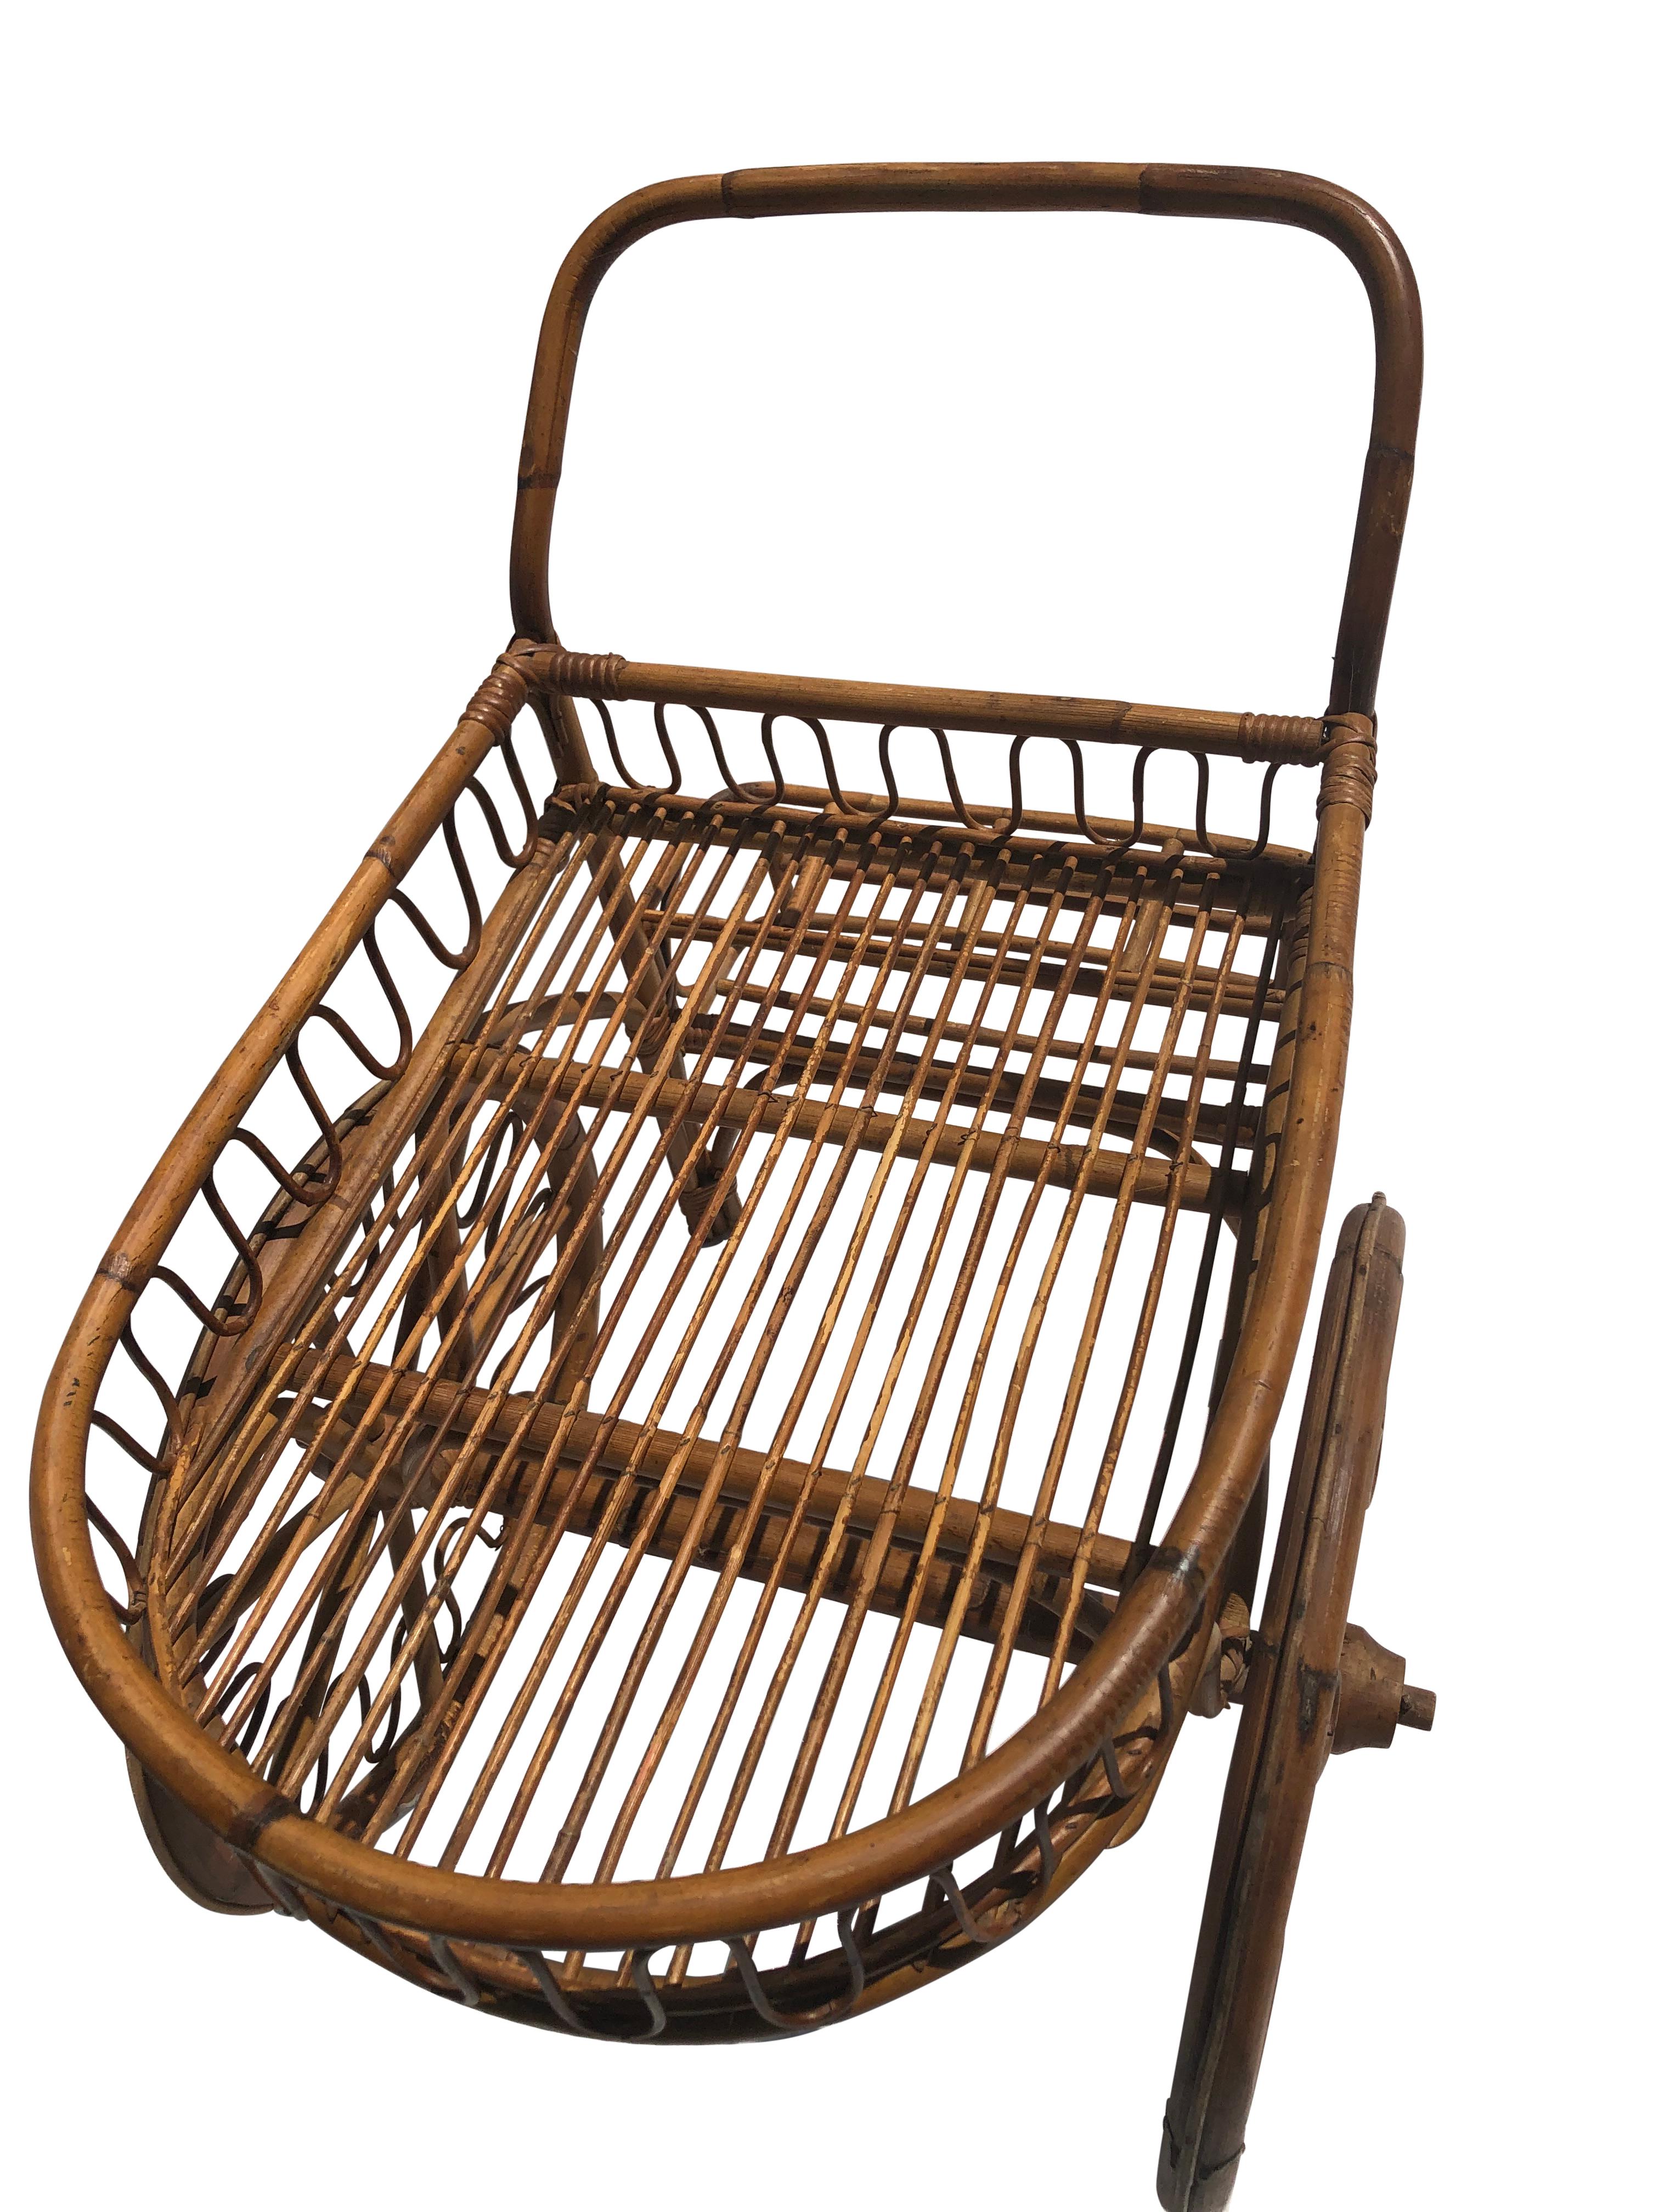 Vintage French Rattan Bar Cart. Designed to accommodate bottles and barware, its thoughtfully crafted construction marries utility with elegance and design. The whimsical touch comes courtesy of its oversized wheels, enabling effortless